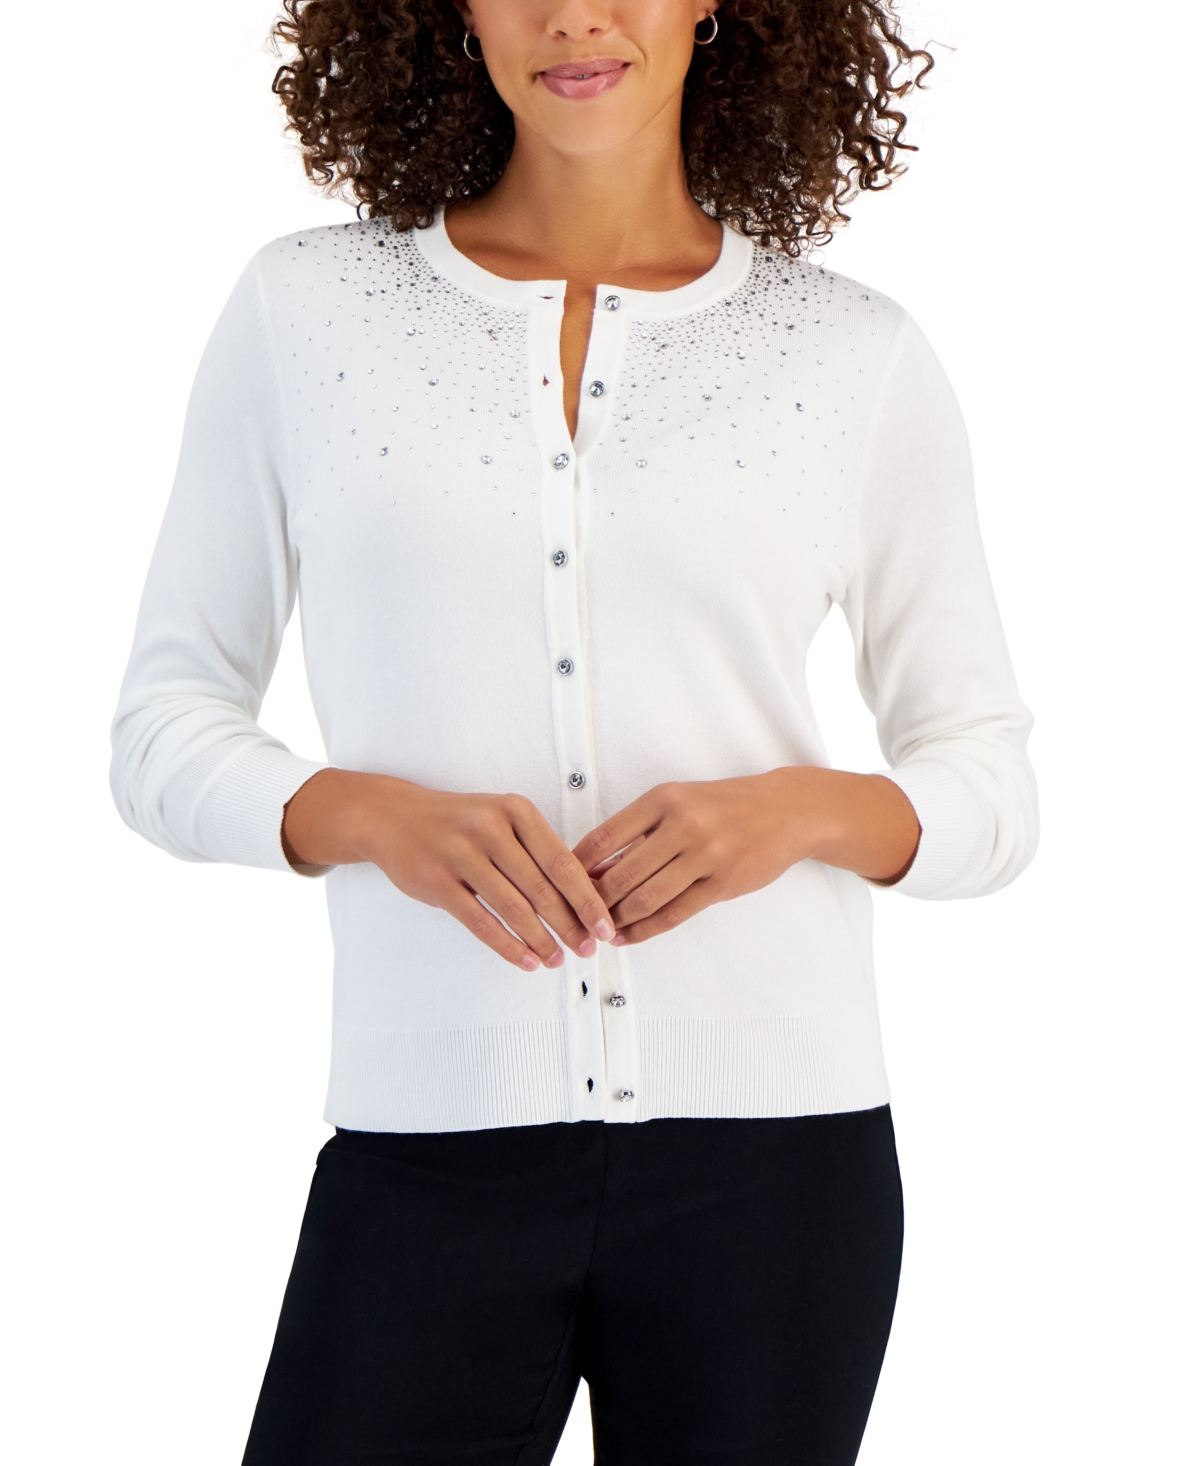 Jm Collection Women's Embellished Button Cardigan, Created for Macy's